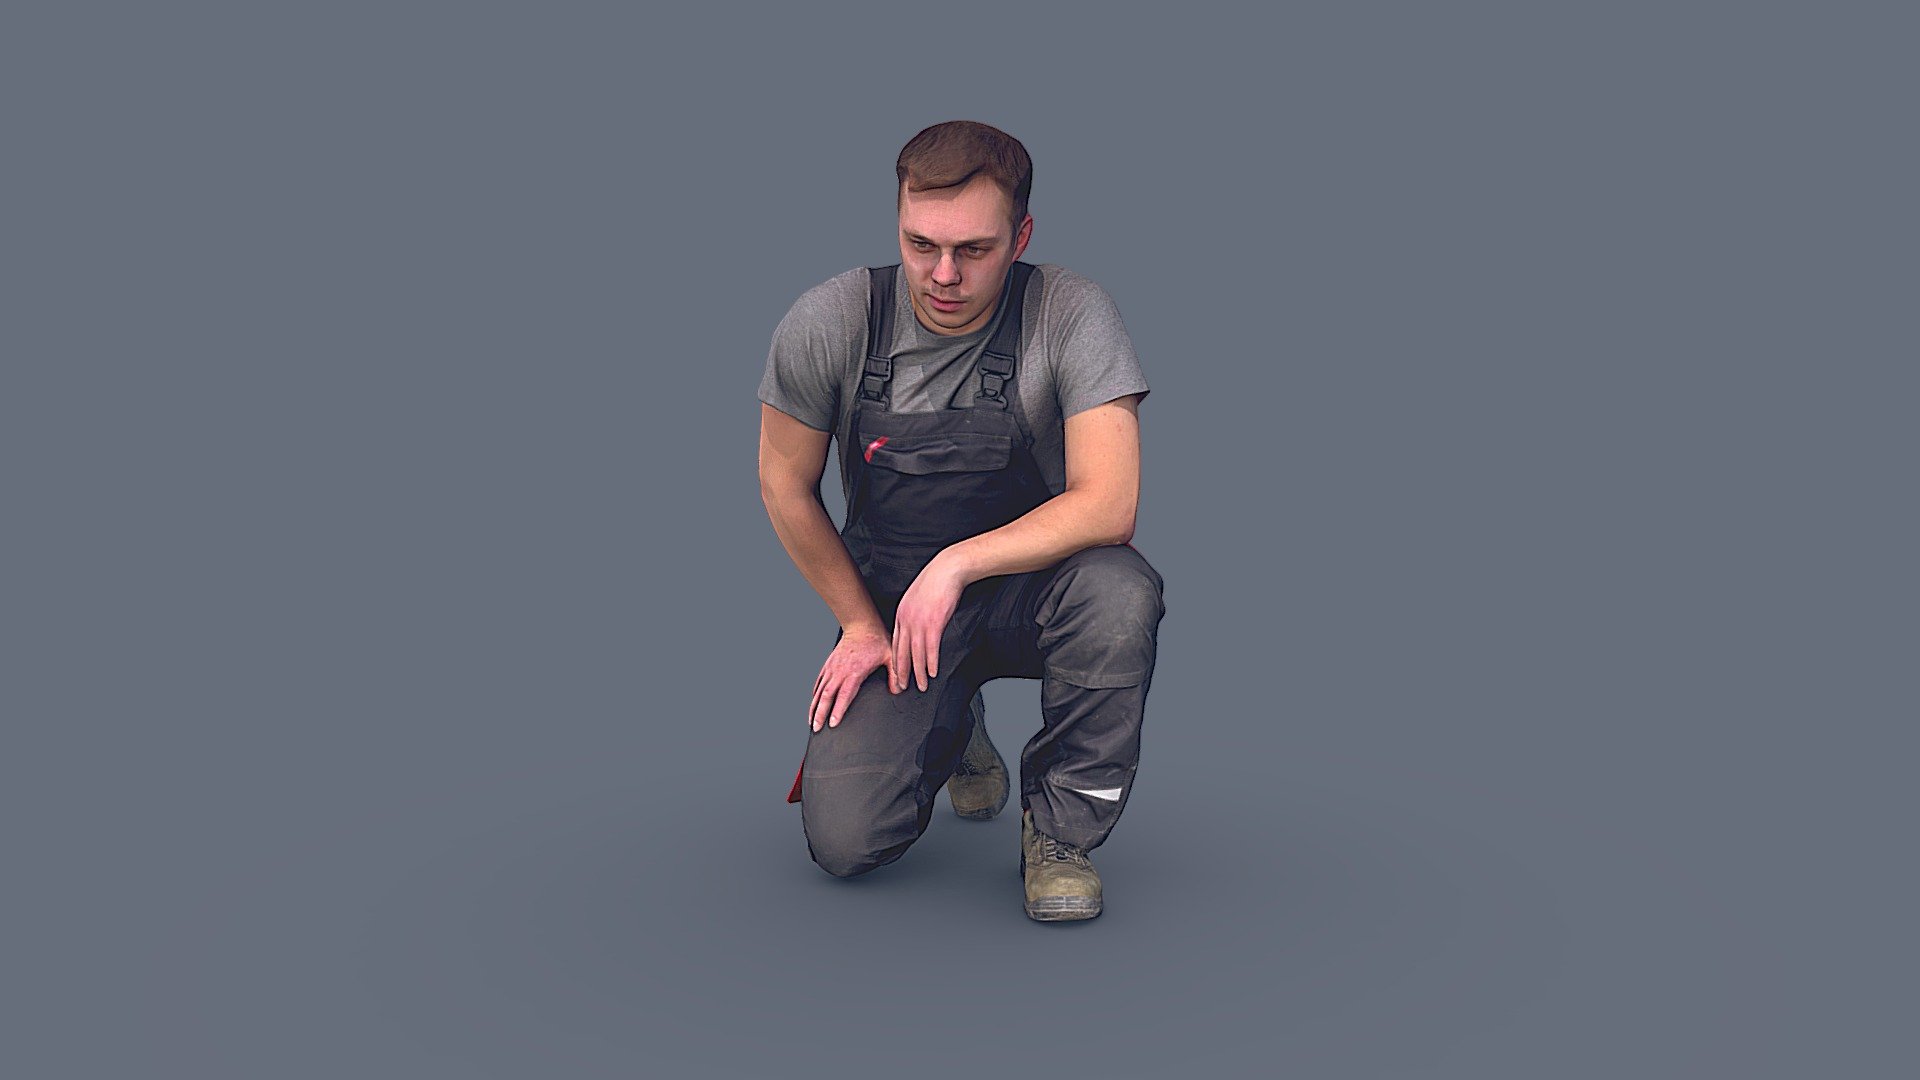 ✉️ A young man, strong-built guy, a builder, a worker, in a work uniform, overalls, sitting, leaning on one knee, his gaze is directed downward.

🦾 This model will be an excellent mid-range participant. It does not need to be very close and try to see the details, it reveals and demonstrates its texture as much as possible in case of a certain distance from the foreground.

⚙️ Photorealistic Construction Worker Character 3d model ready for Virtual Reality (VR), Augmented Reality (AR), games and other real-time apps. 
Suitable for the architectural visualization and another graphical projects.
50 000 polygons per model 3d model